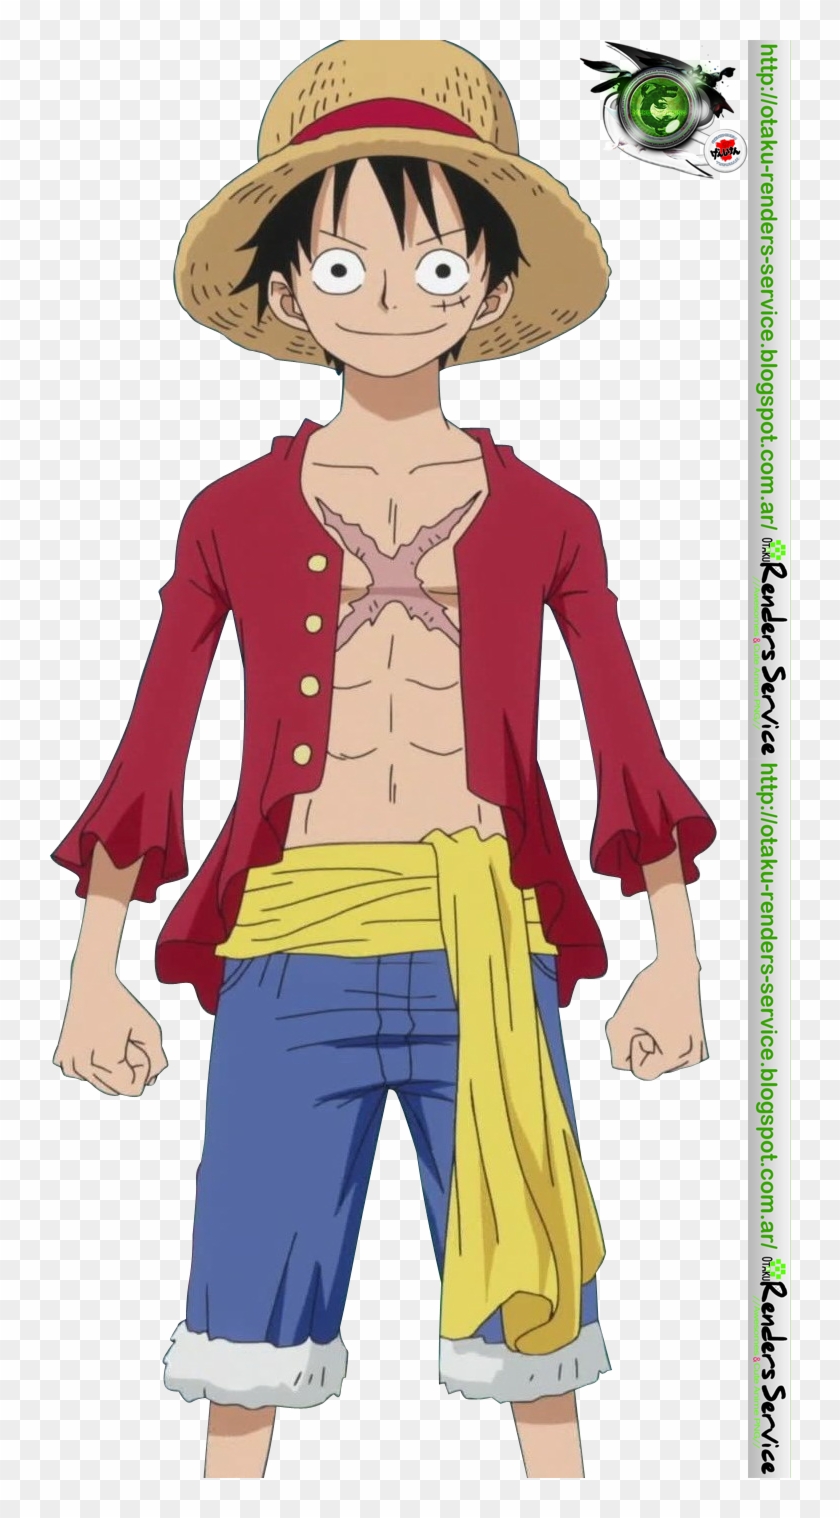 Find hd One Piece World Seeker Character Renders Of The Straw - One Piece  Luffy Render, HD Png Download.is free png image…